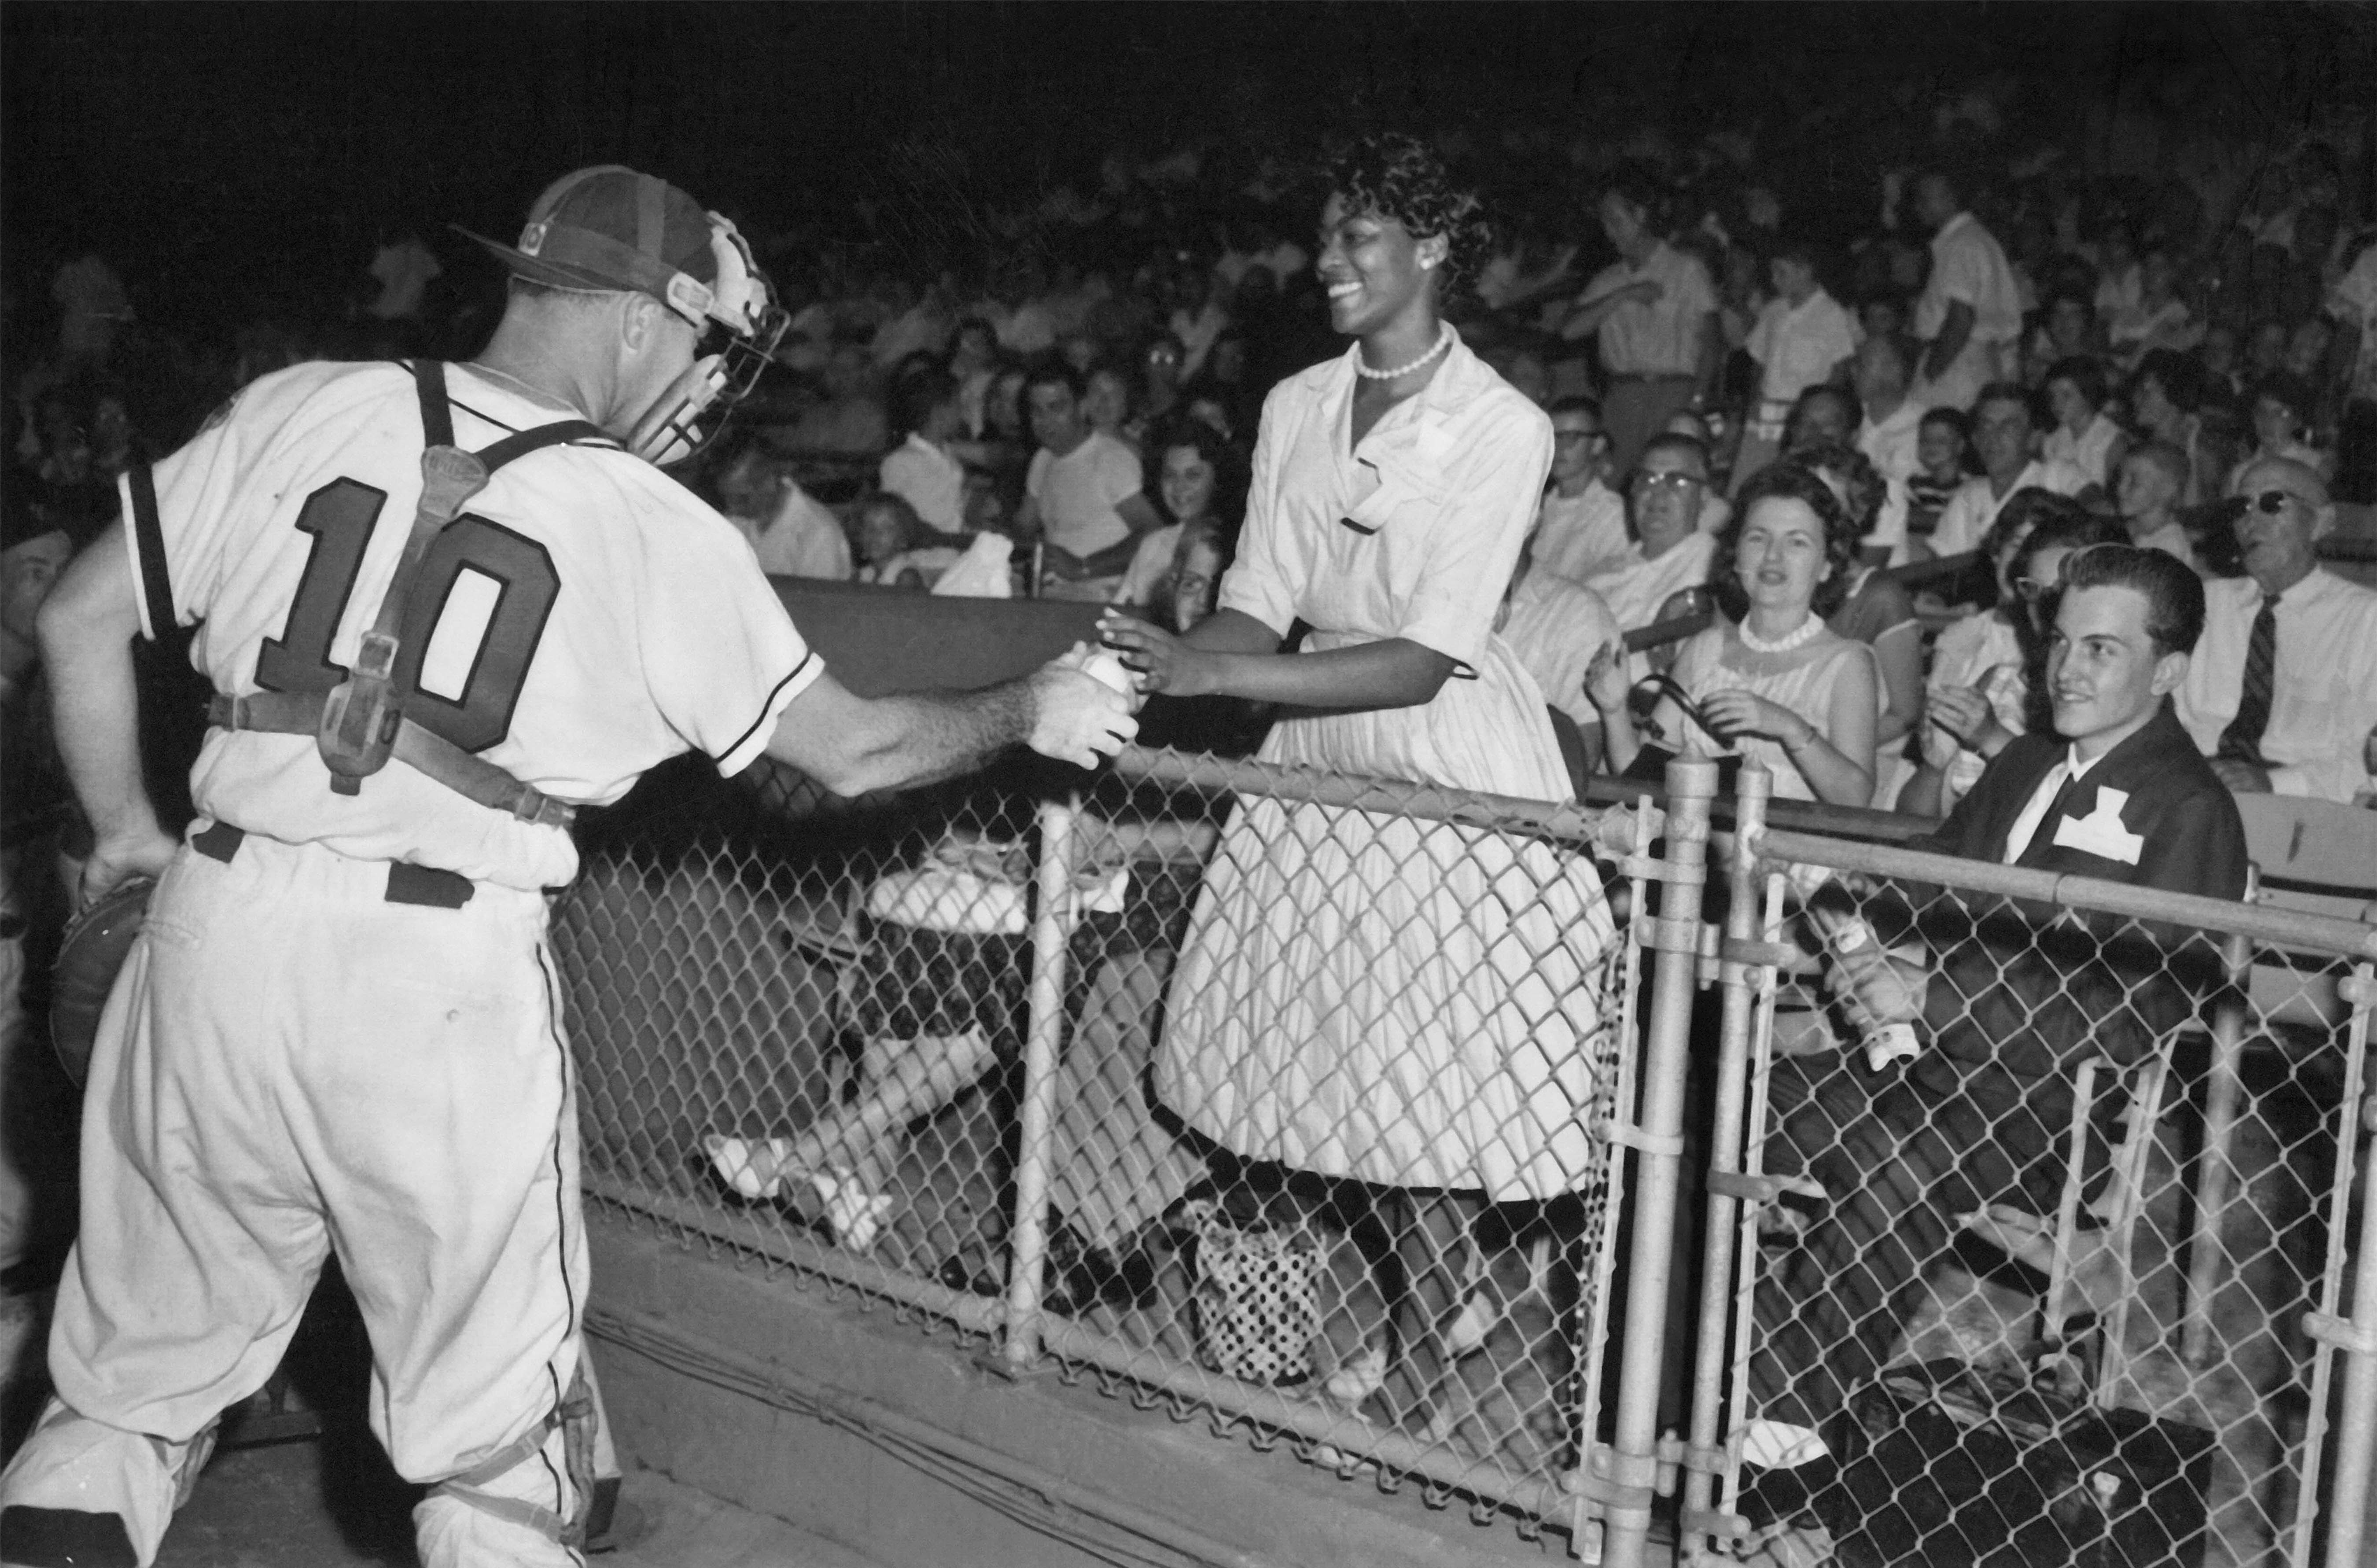 A catcher hands a baseball to a woman in the stands.